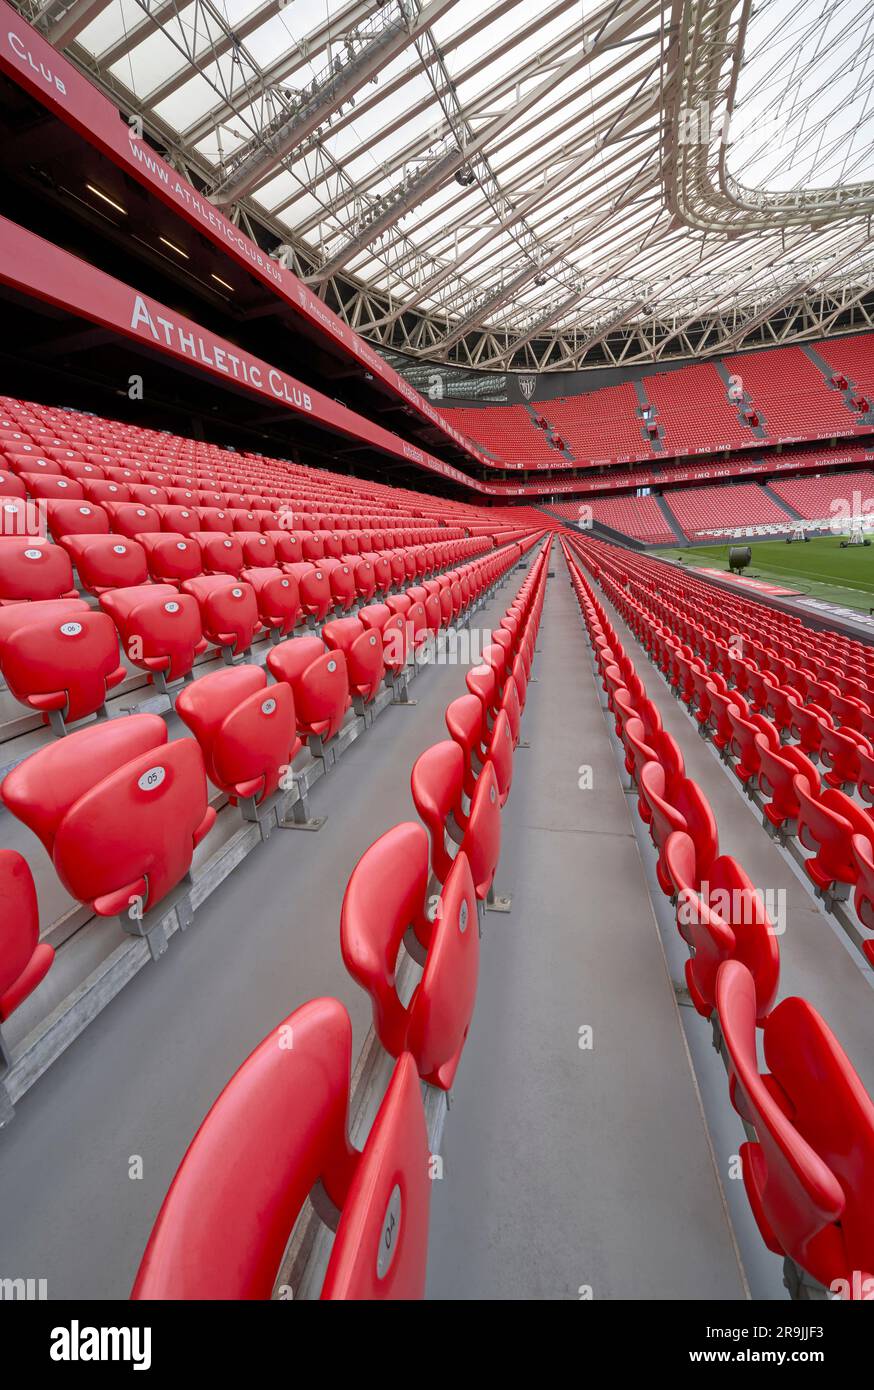 At the tribunes of San Mames arena - the official home ground of FC Athletic Bilbao, Spain Stock Photo